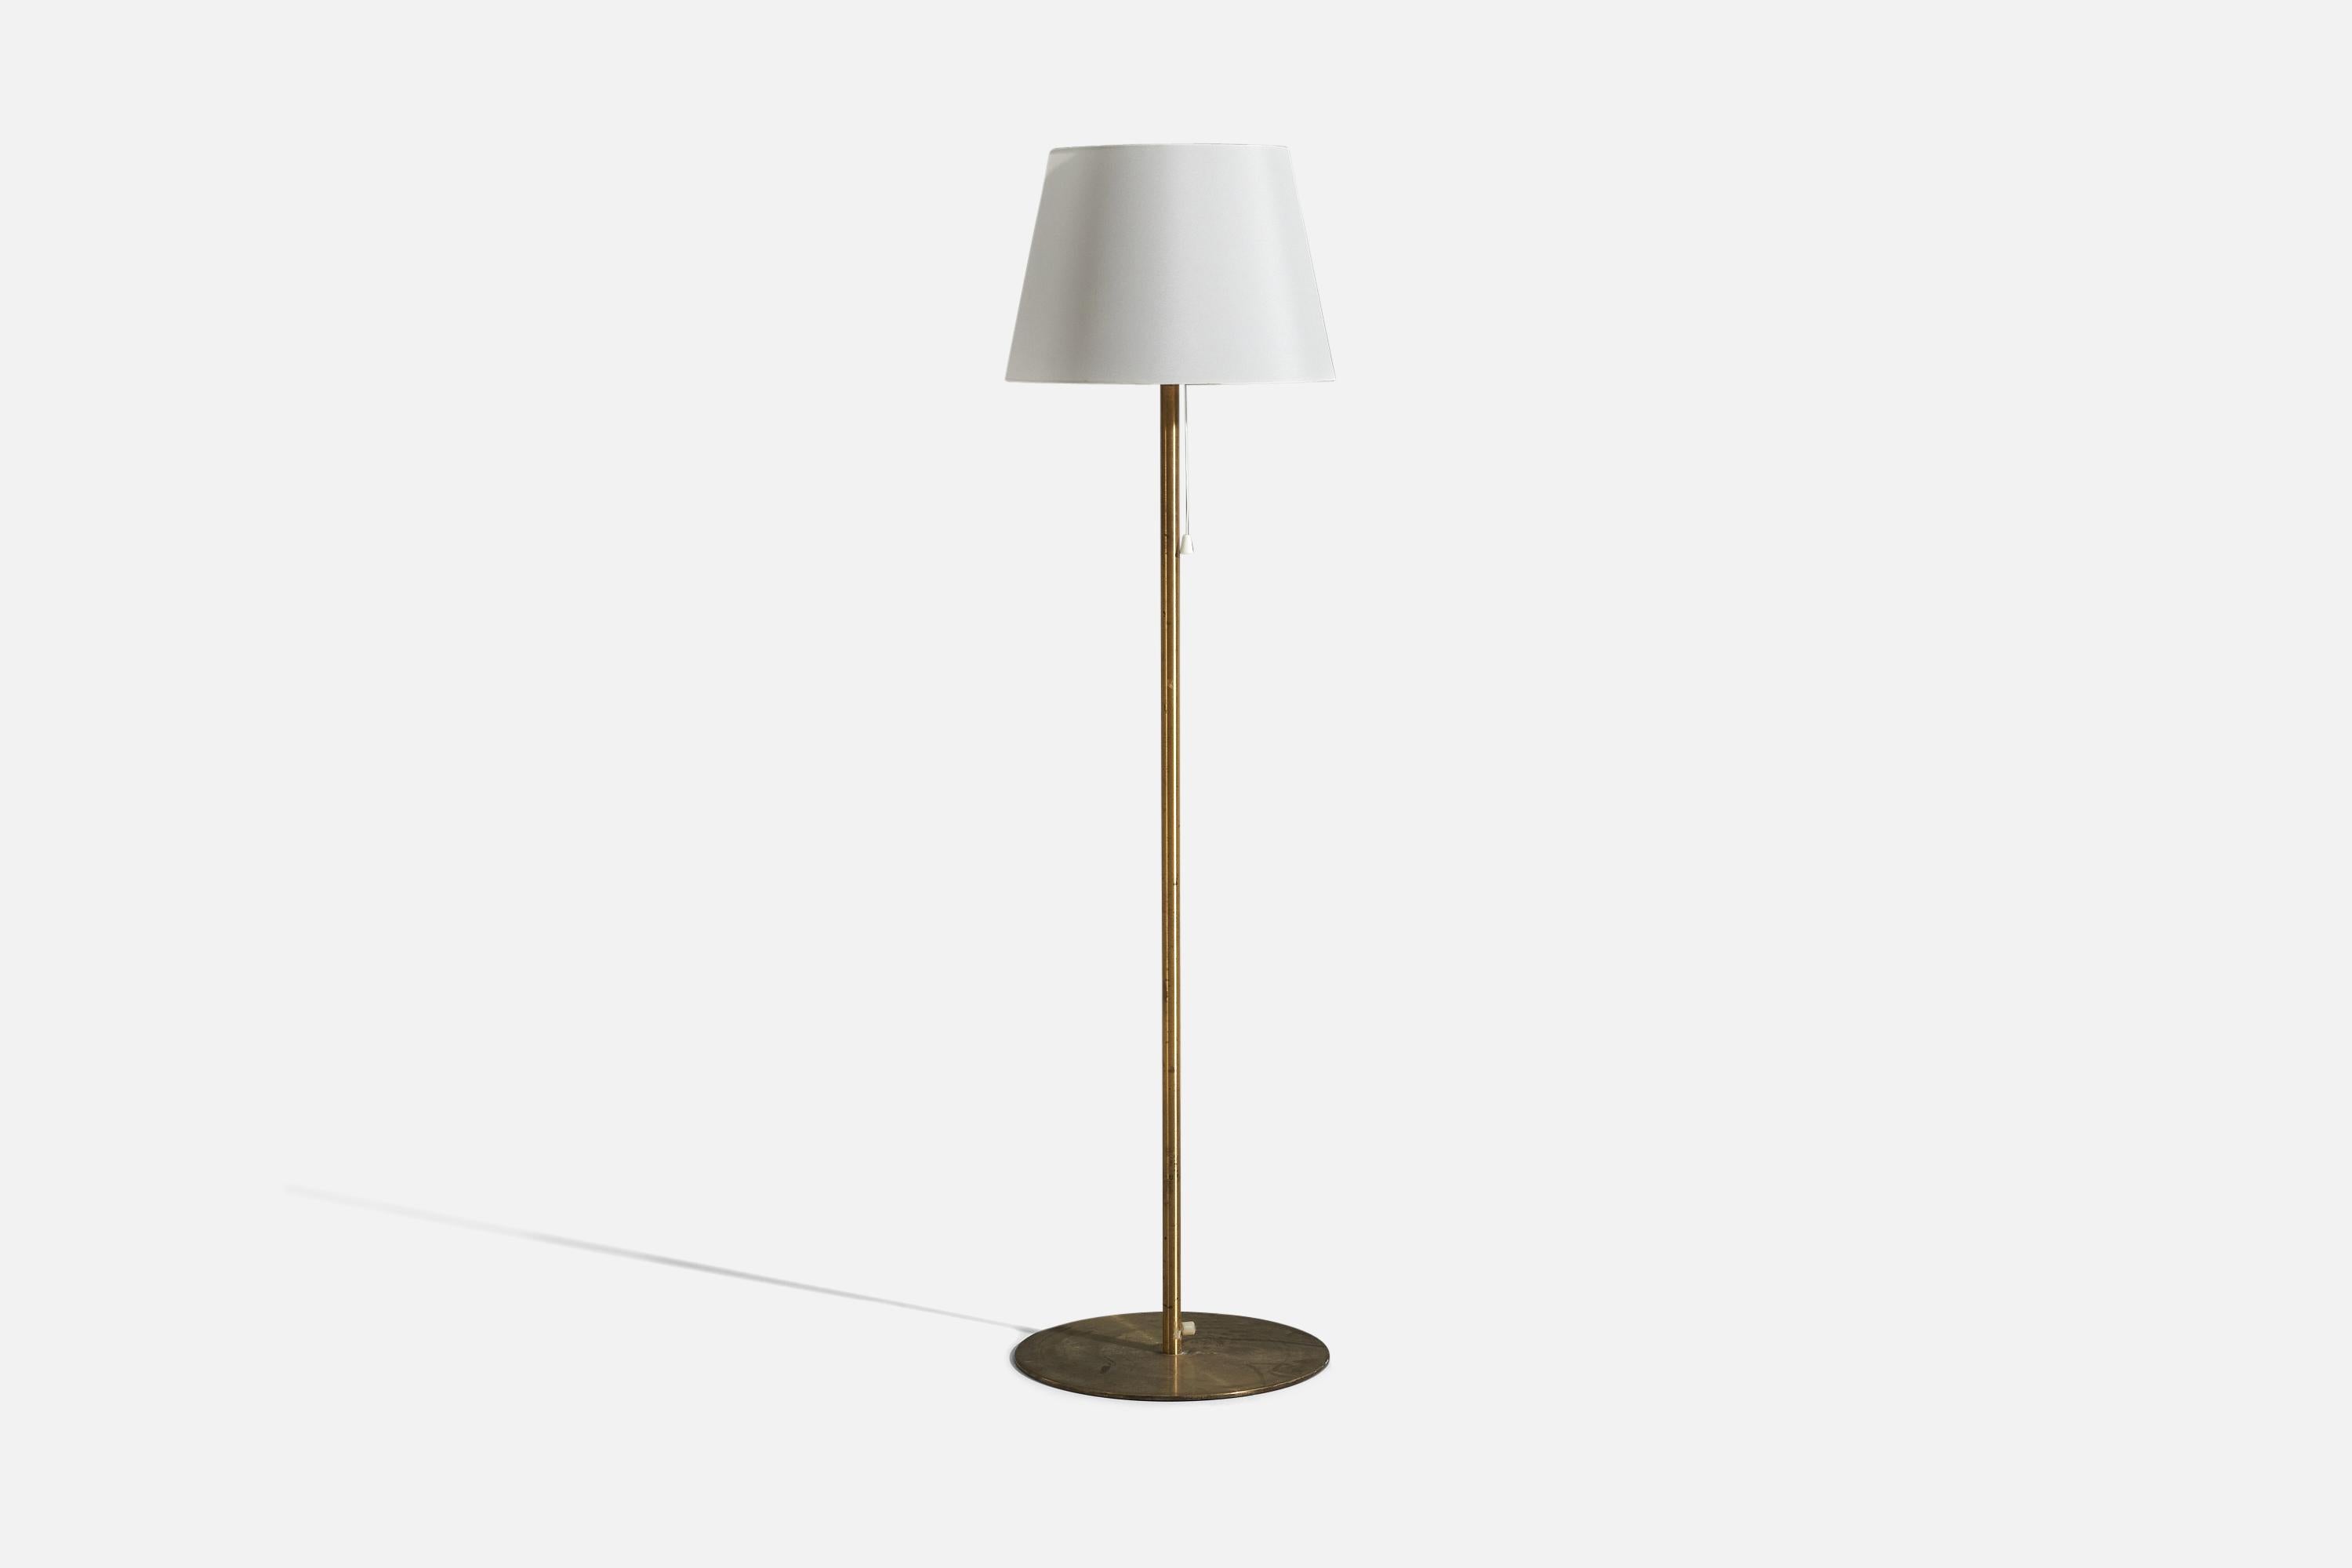 A brass floor lamp with a fabric lampshade, designed and produced by Luxus Vittsjö, Sweden, 1960s.

Sold with lampshade 
Dimensions of floor lamp (inches) : 48.25 x 13.875 x 13.875 (H x W x D)
Dimensions of shade (inches) : 13 x 15 x 10 (T x B x